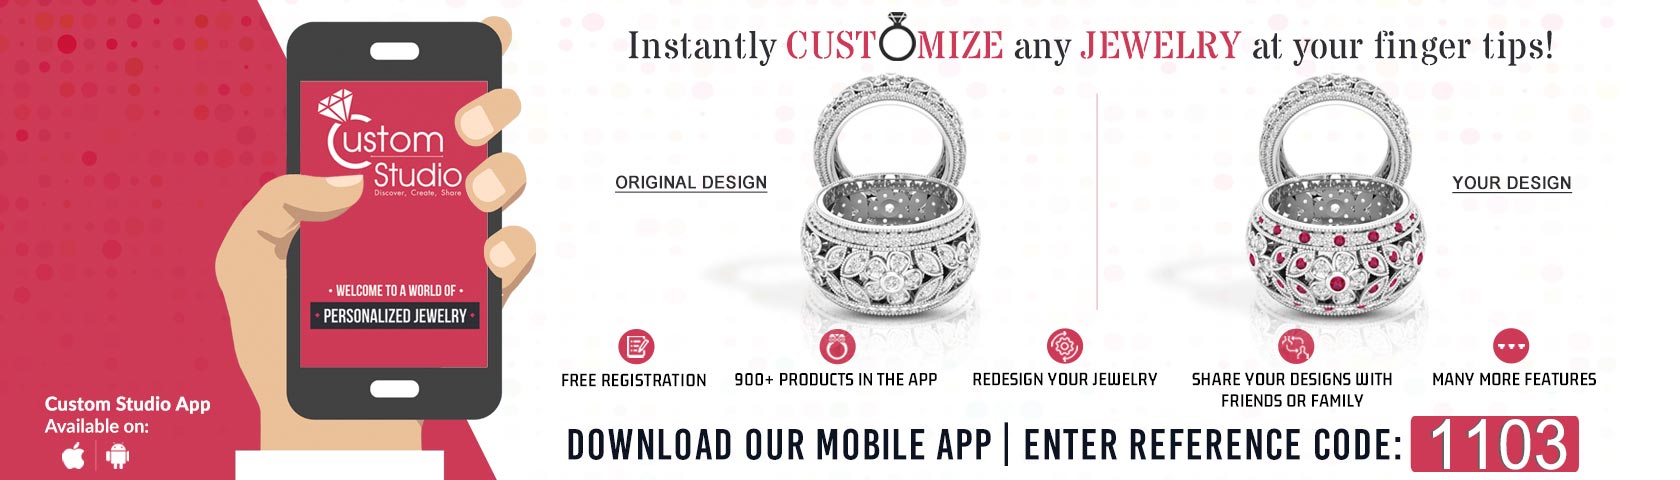 Customize Any Jewelry Instantly